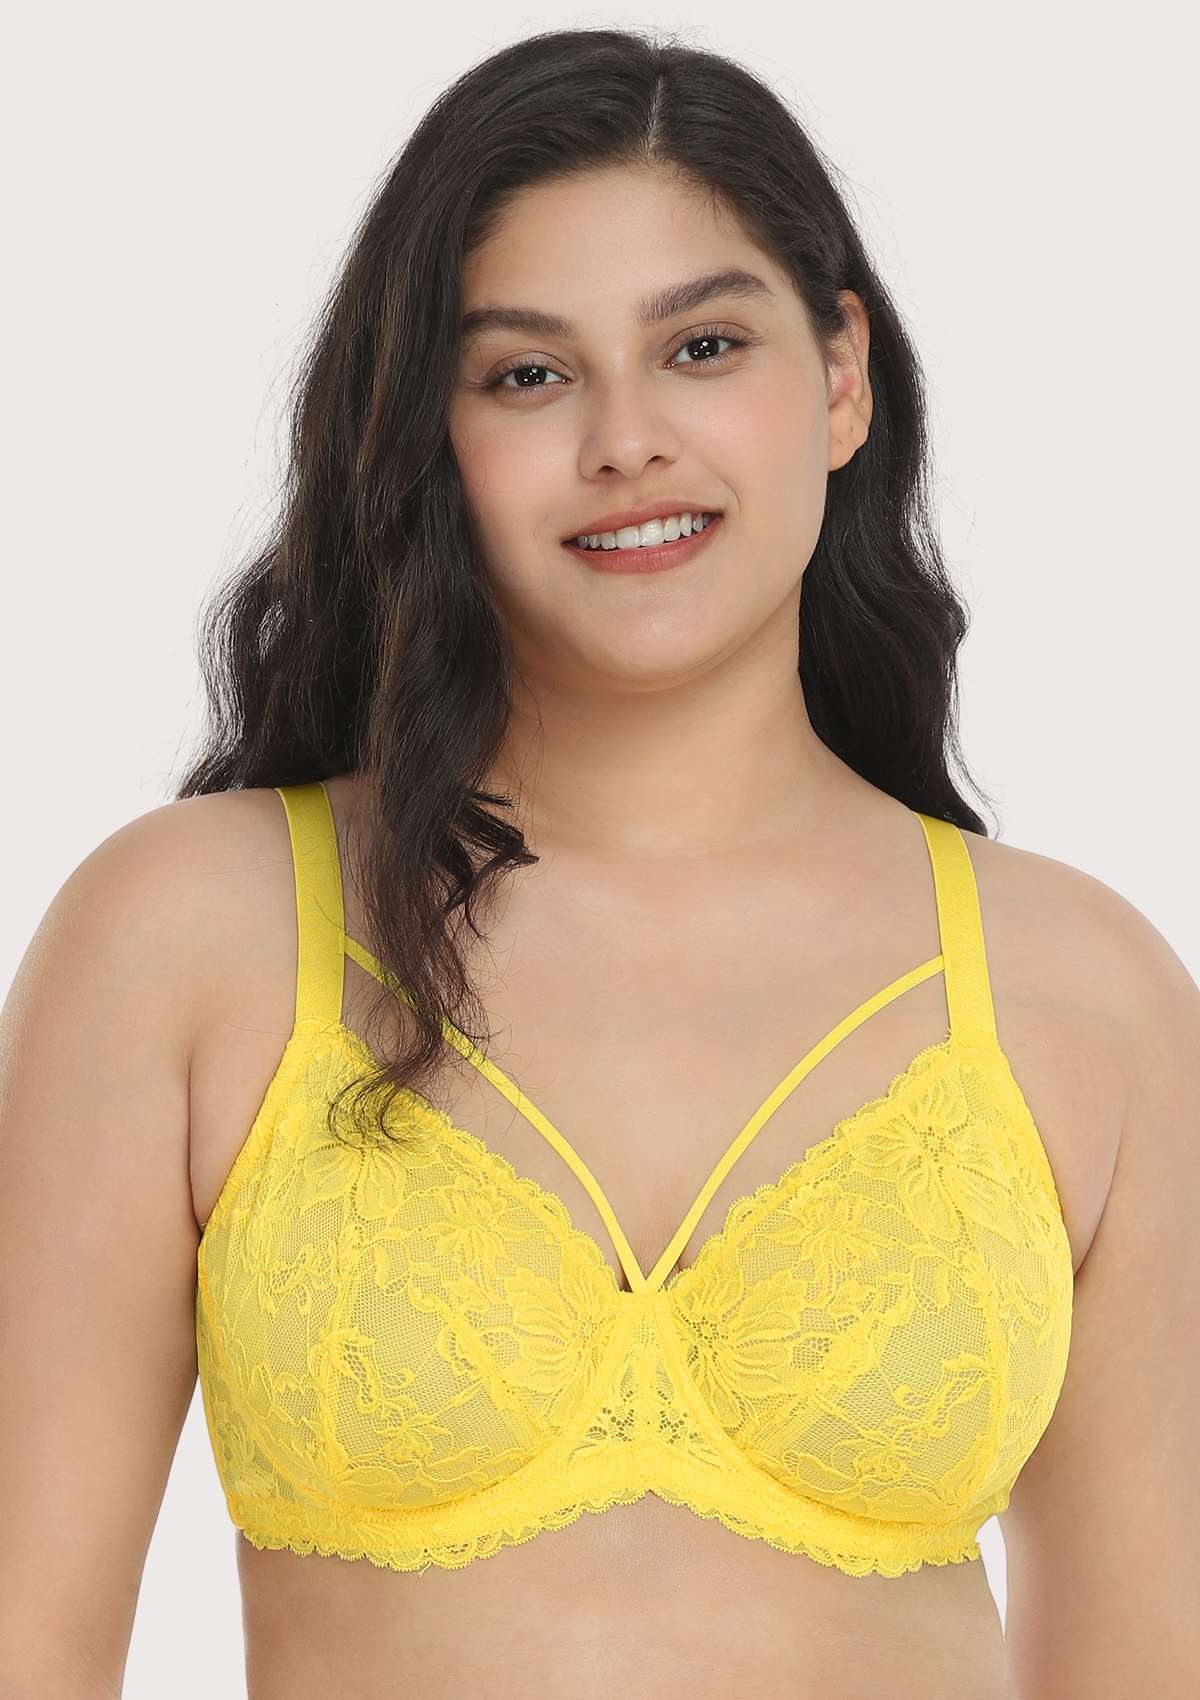 HSIA Unlined Lace Mesh Minimizer Bra For Large Breasts, Full Coverage - Bright Green / 42 / D